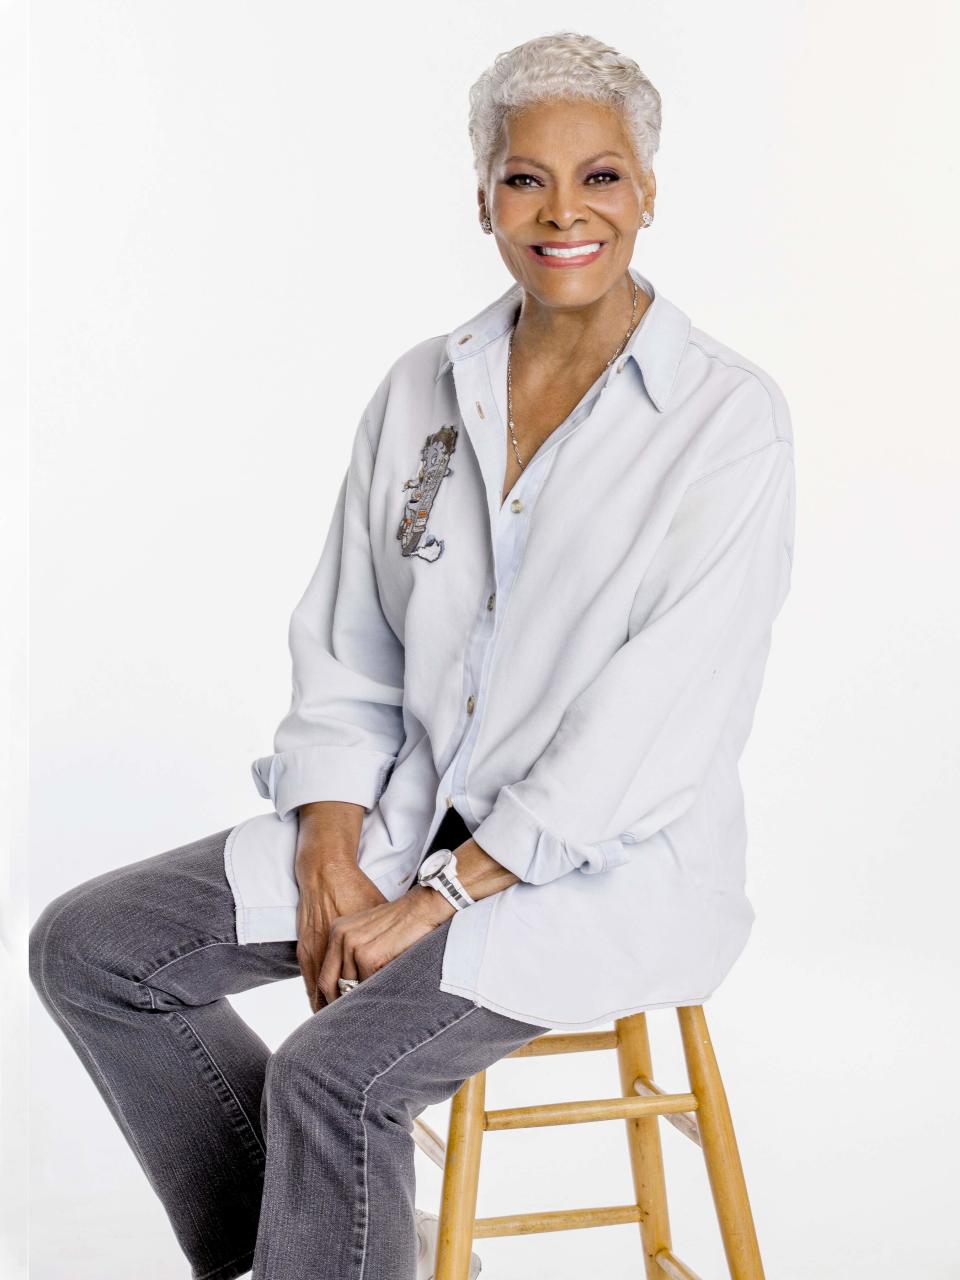 Dionne Warwick's six-decades of pop musical success are well-served in her executive producer role in "Hits: The Musical"